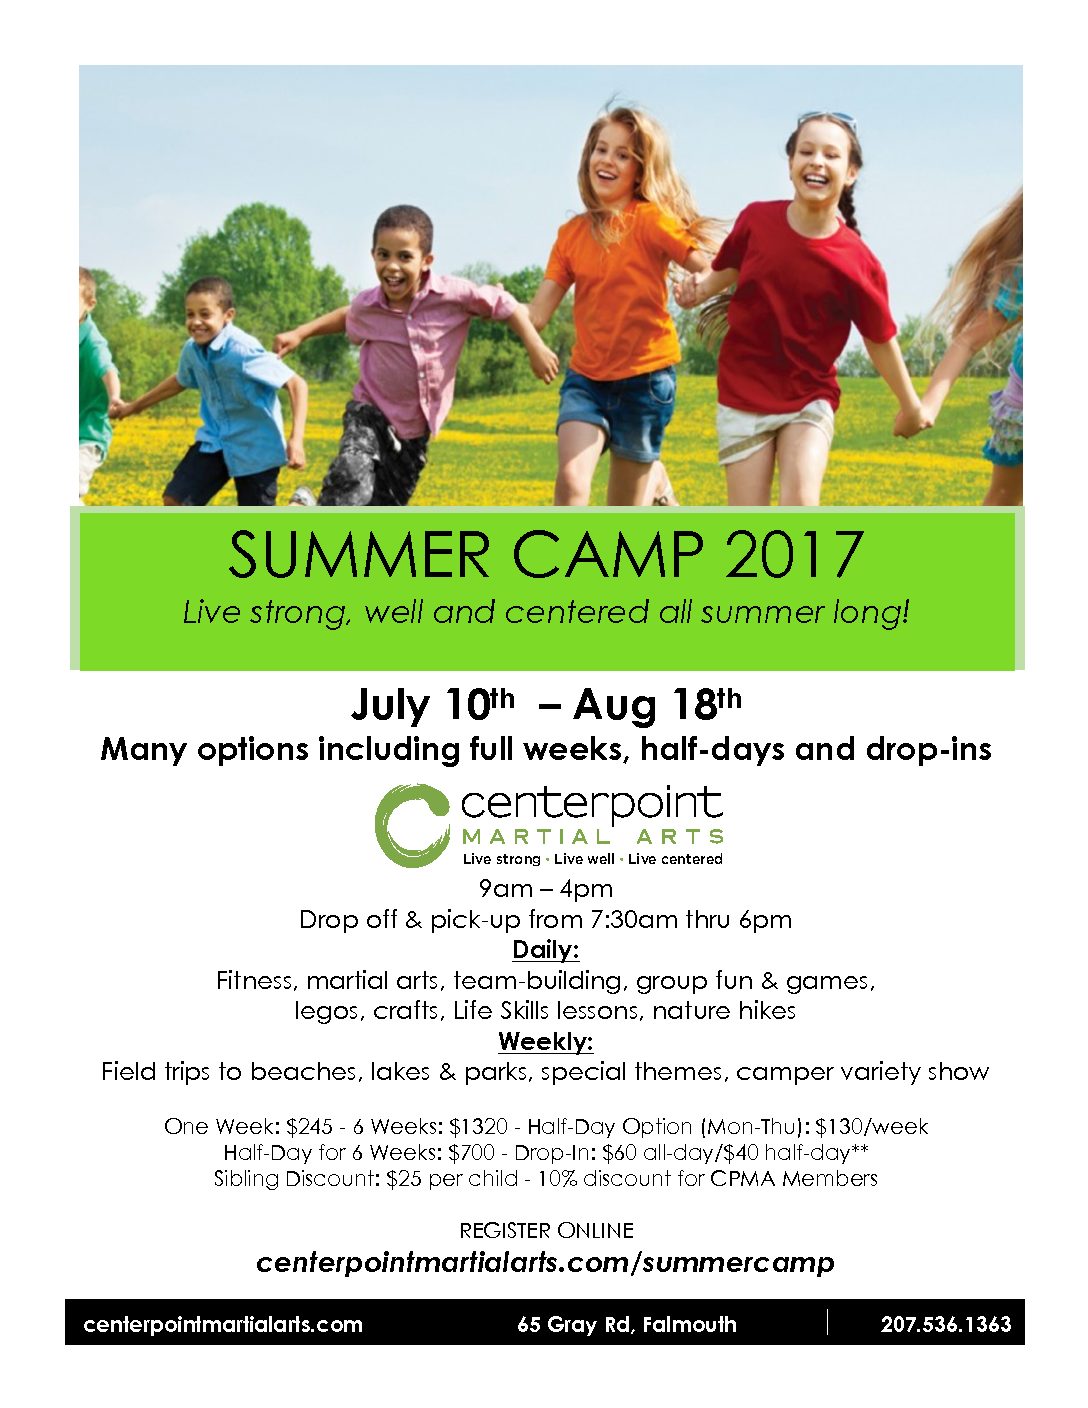 Centerpoint Martial Arts Summer Day Camp 2019 